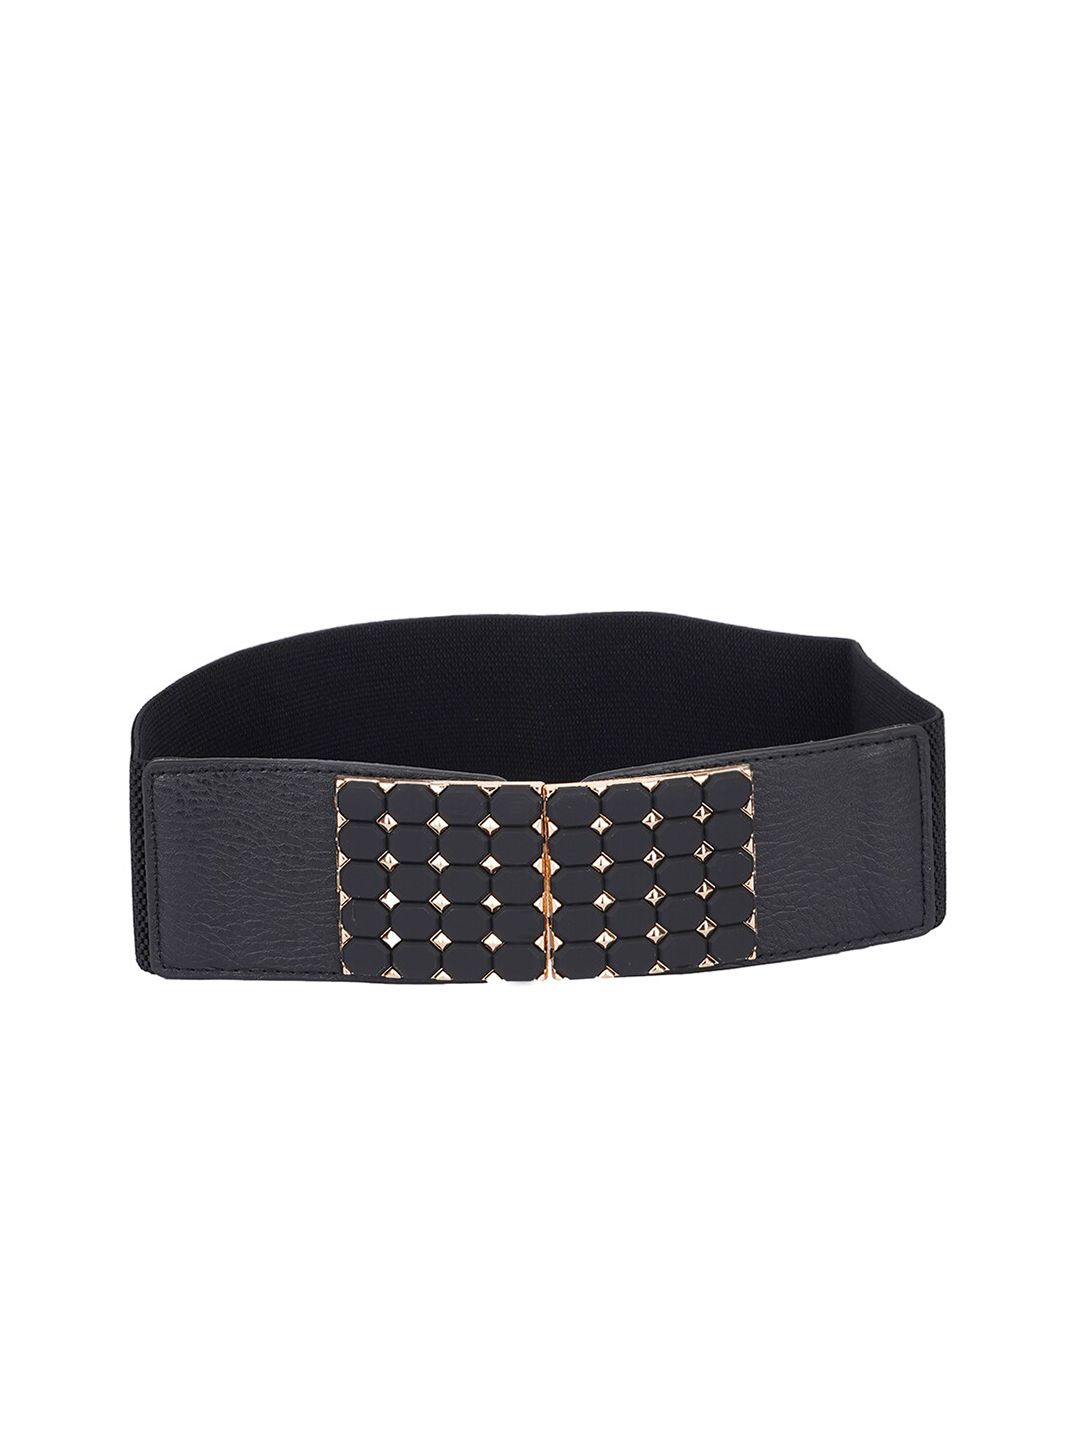 Style SHOES Women Black Embellished Belt Price in India